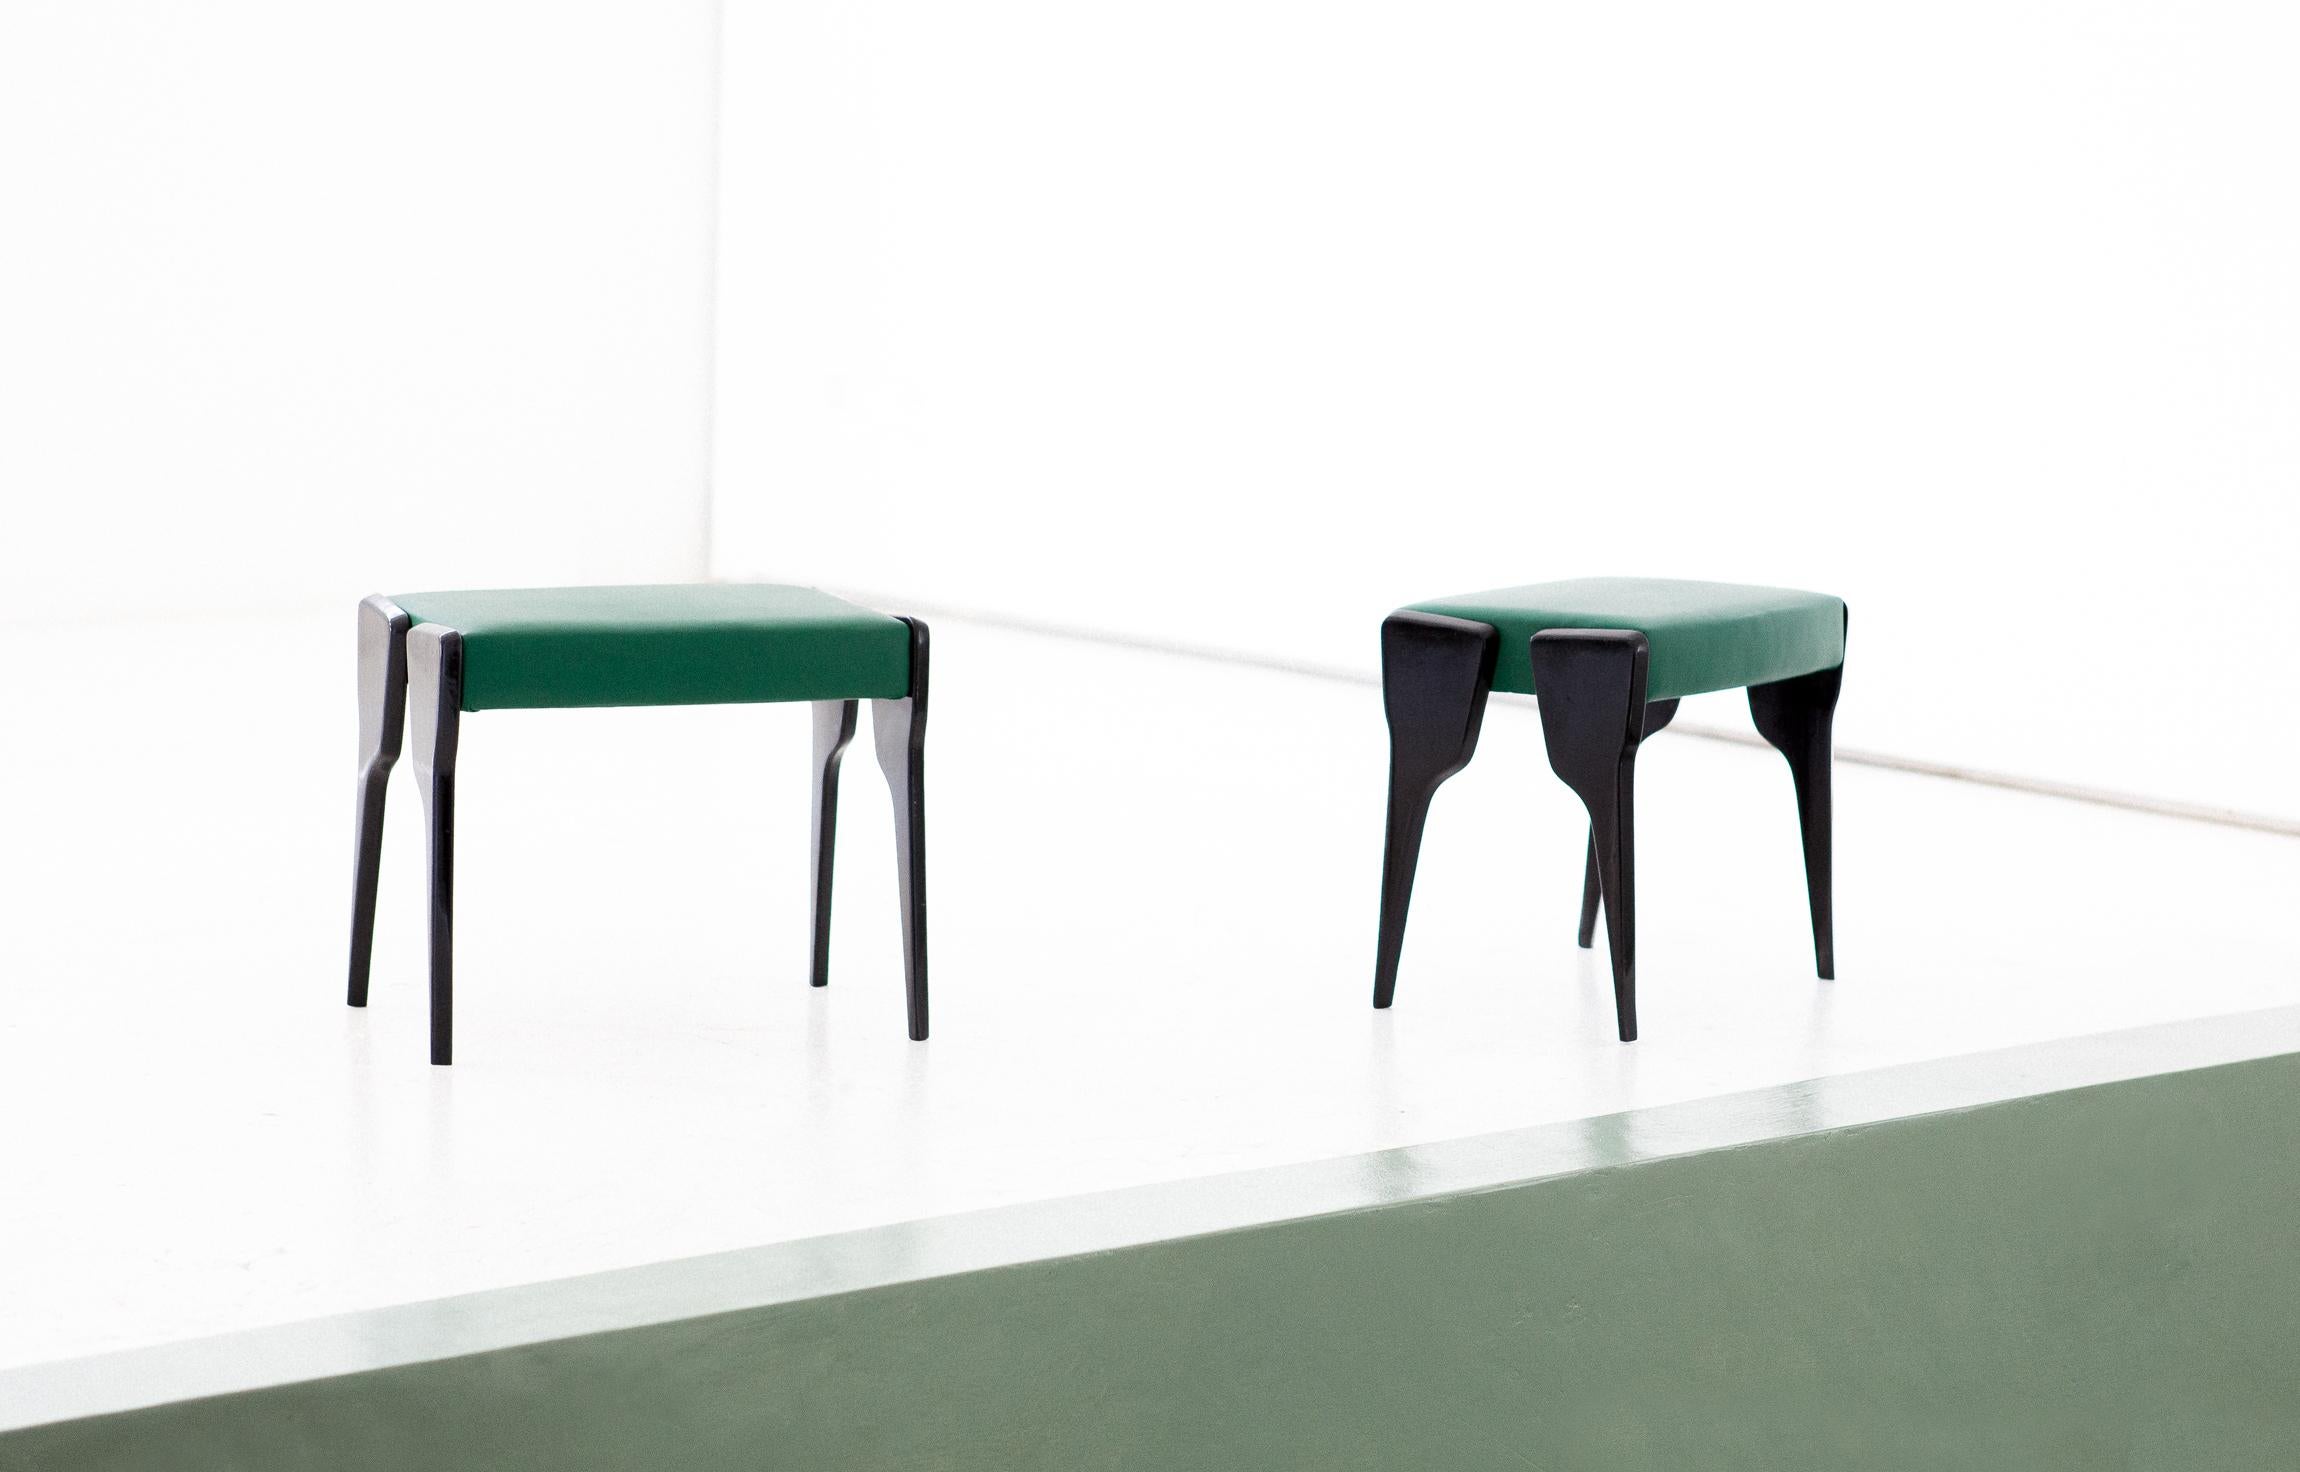 Pair of Italian Modern Stool with Black Mahogany Legs and Natural Green Leather (Mitte des 20. Jahrhunderts)